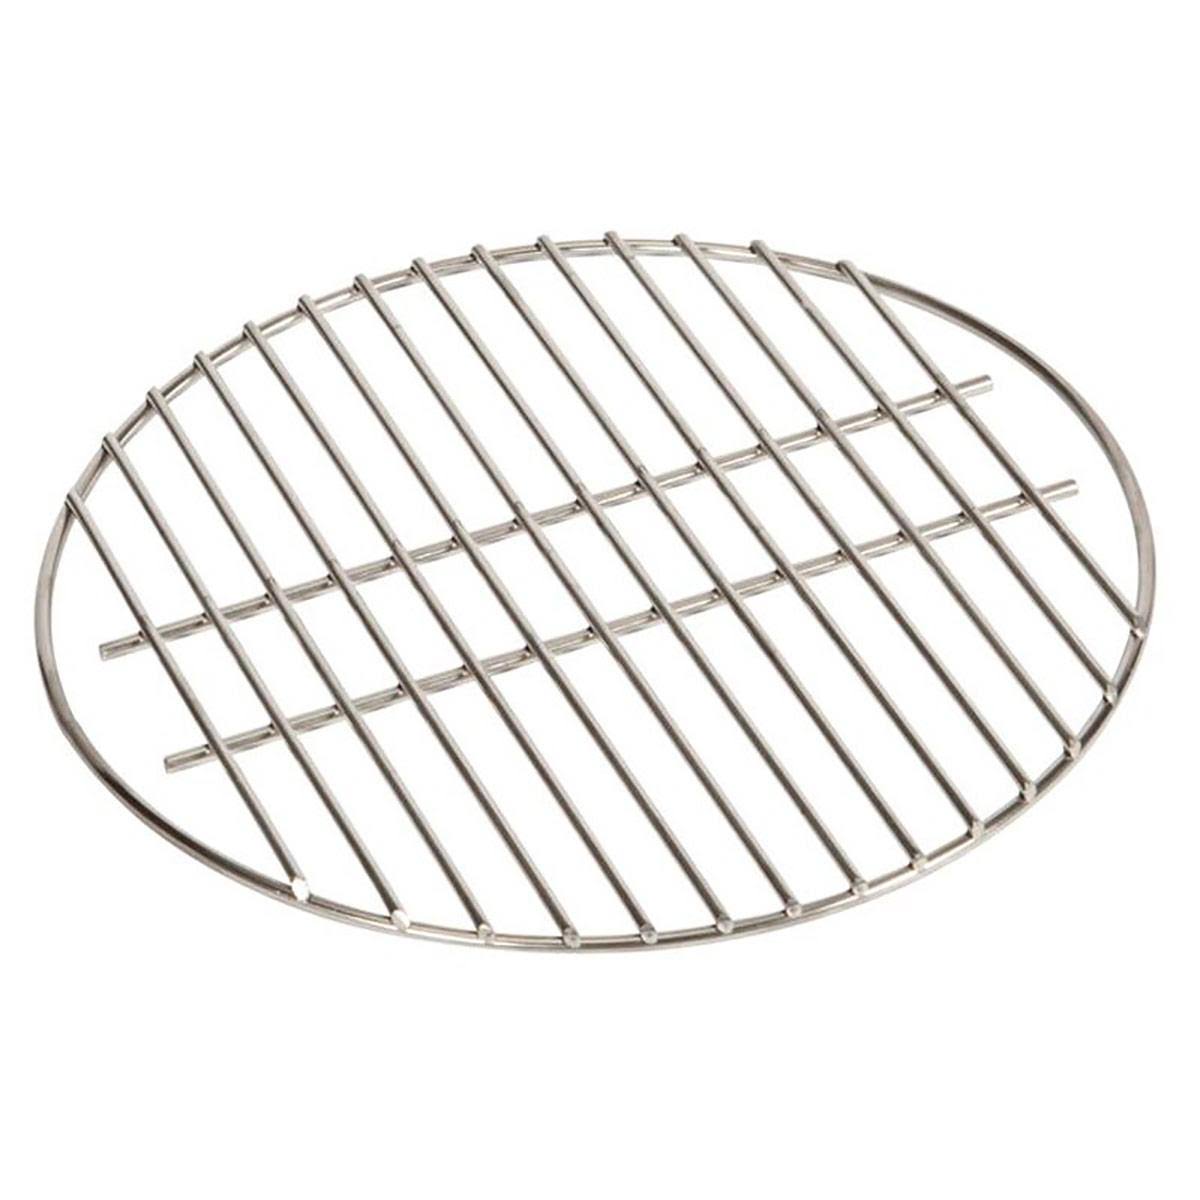 Big Green Egg Stainless Steel Cooking Grid for Large Egg - Silver, 18"